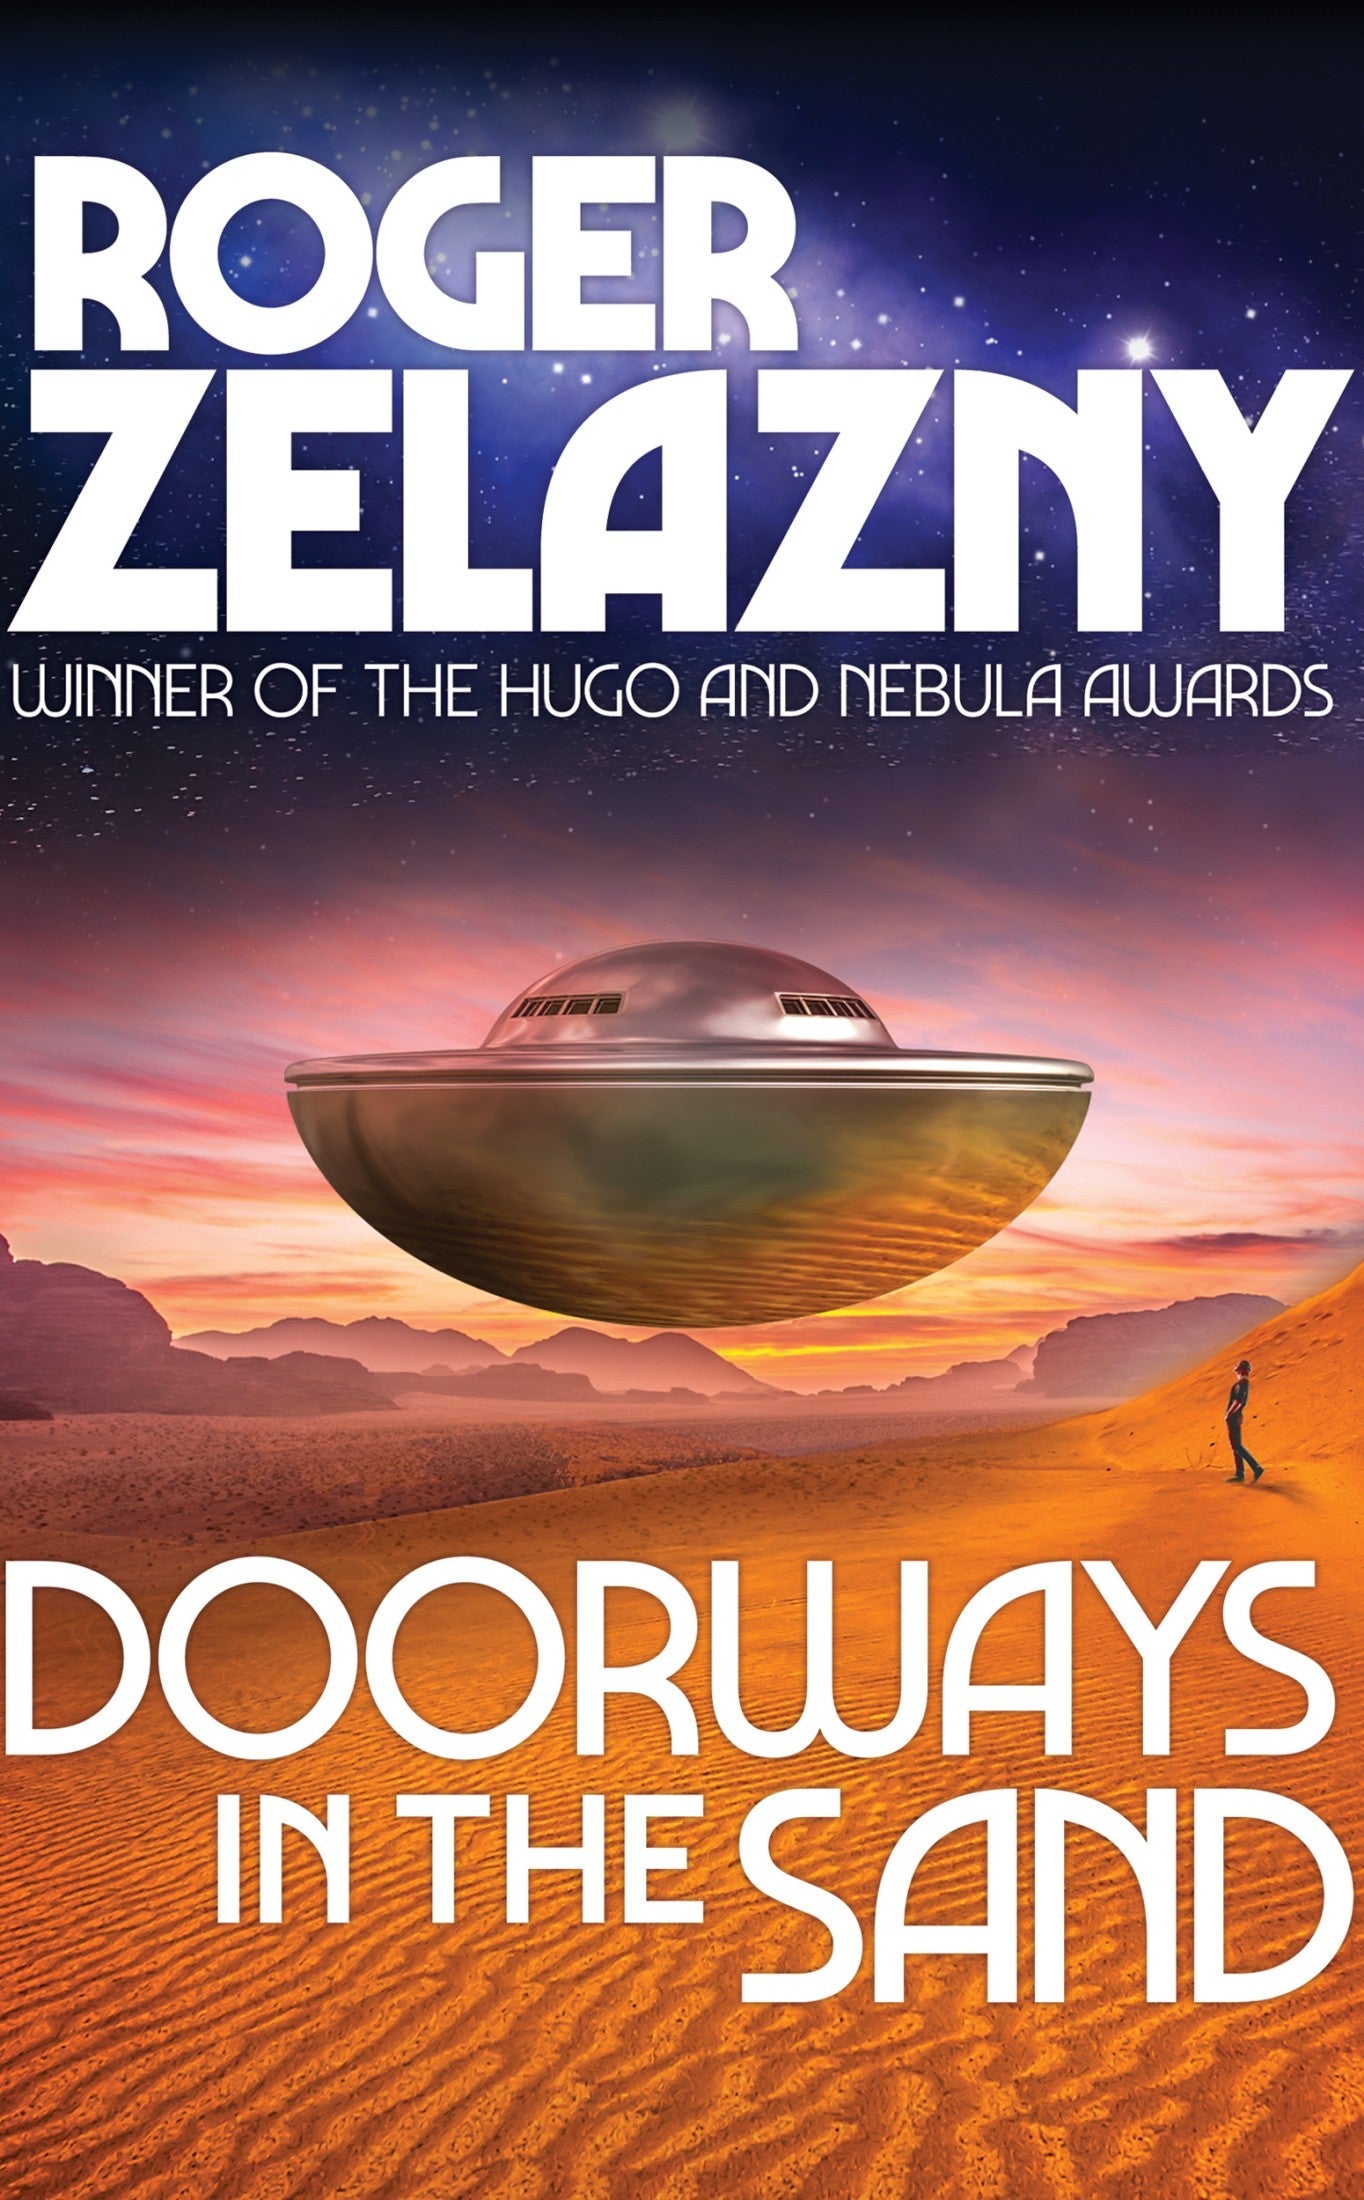 Cover art for Doorways in the Sand.